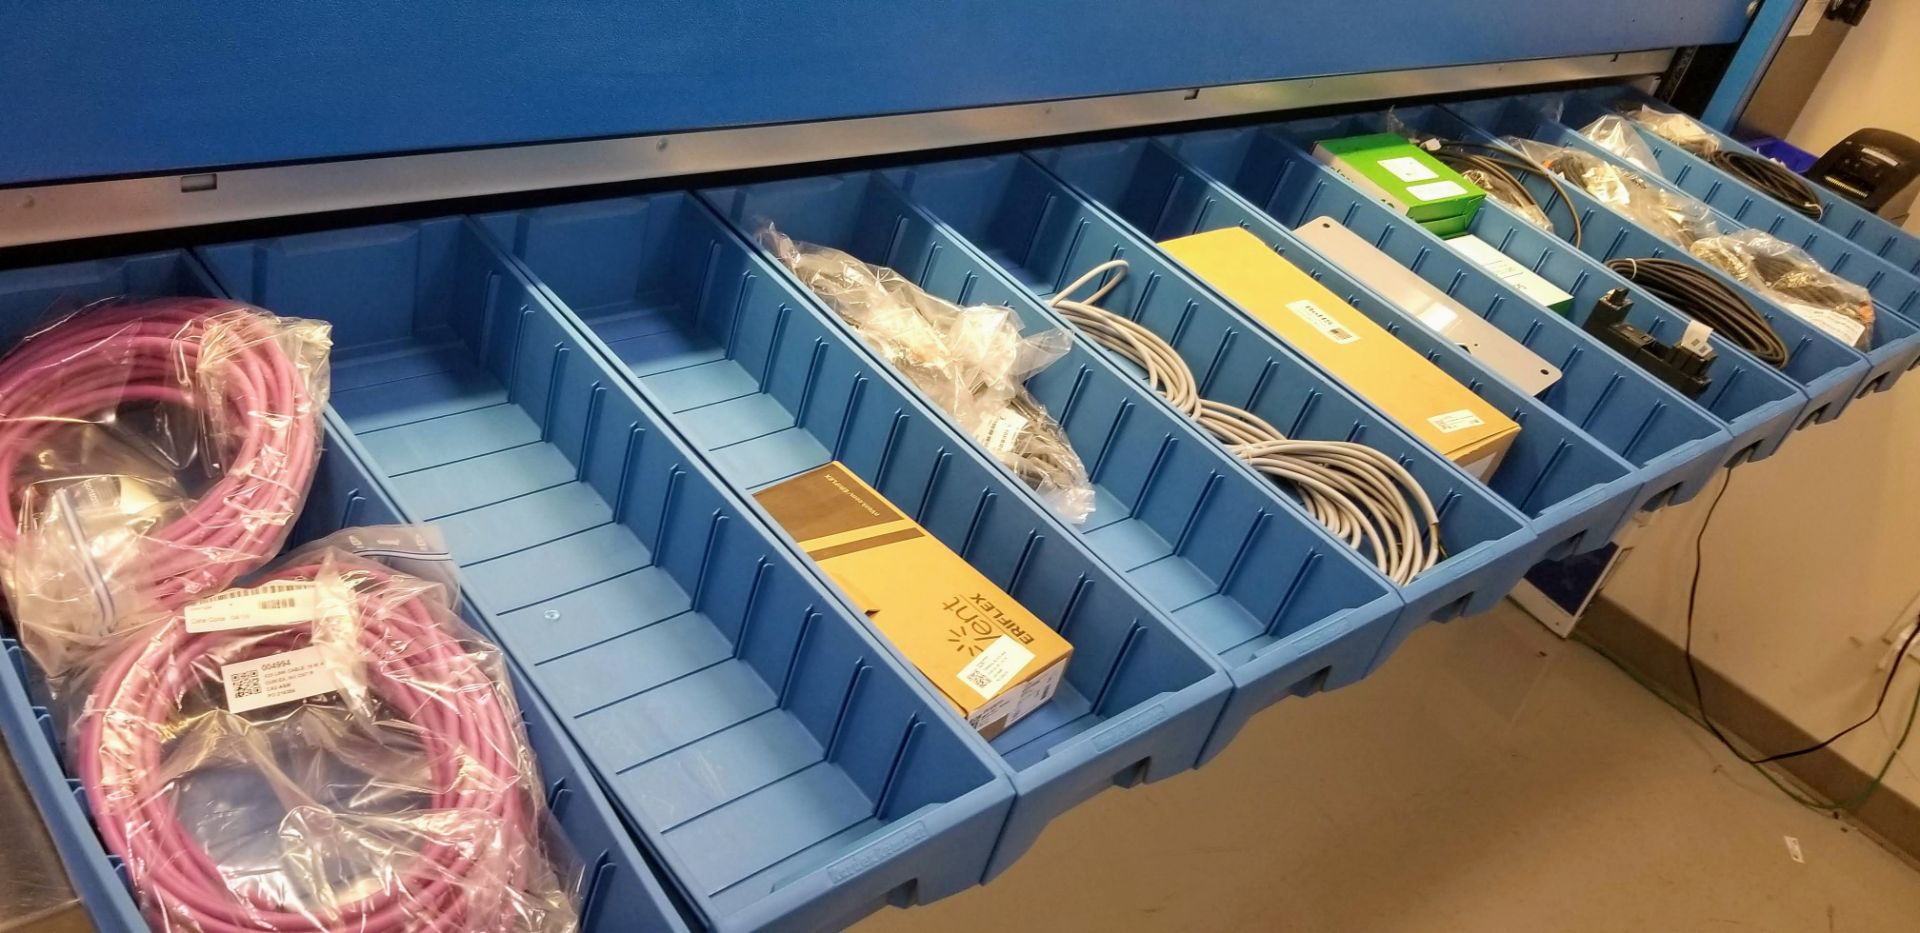 LOT - CONTENTS OF 36 SHELVES INCLUDING: MOTOR CABLES, HYBRID CABLES, PLUGS, INPUT CARDS, MODULES, - Image 23 of 100